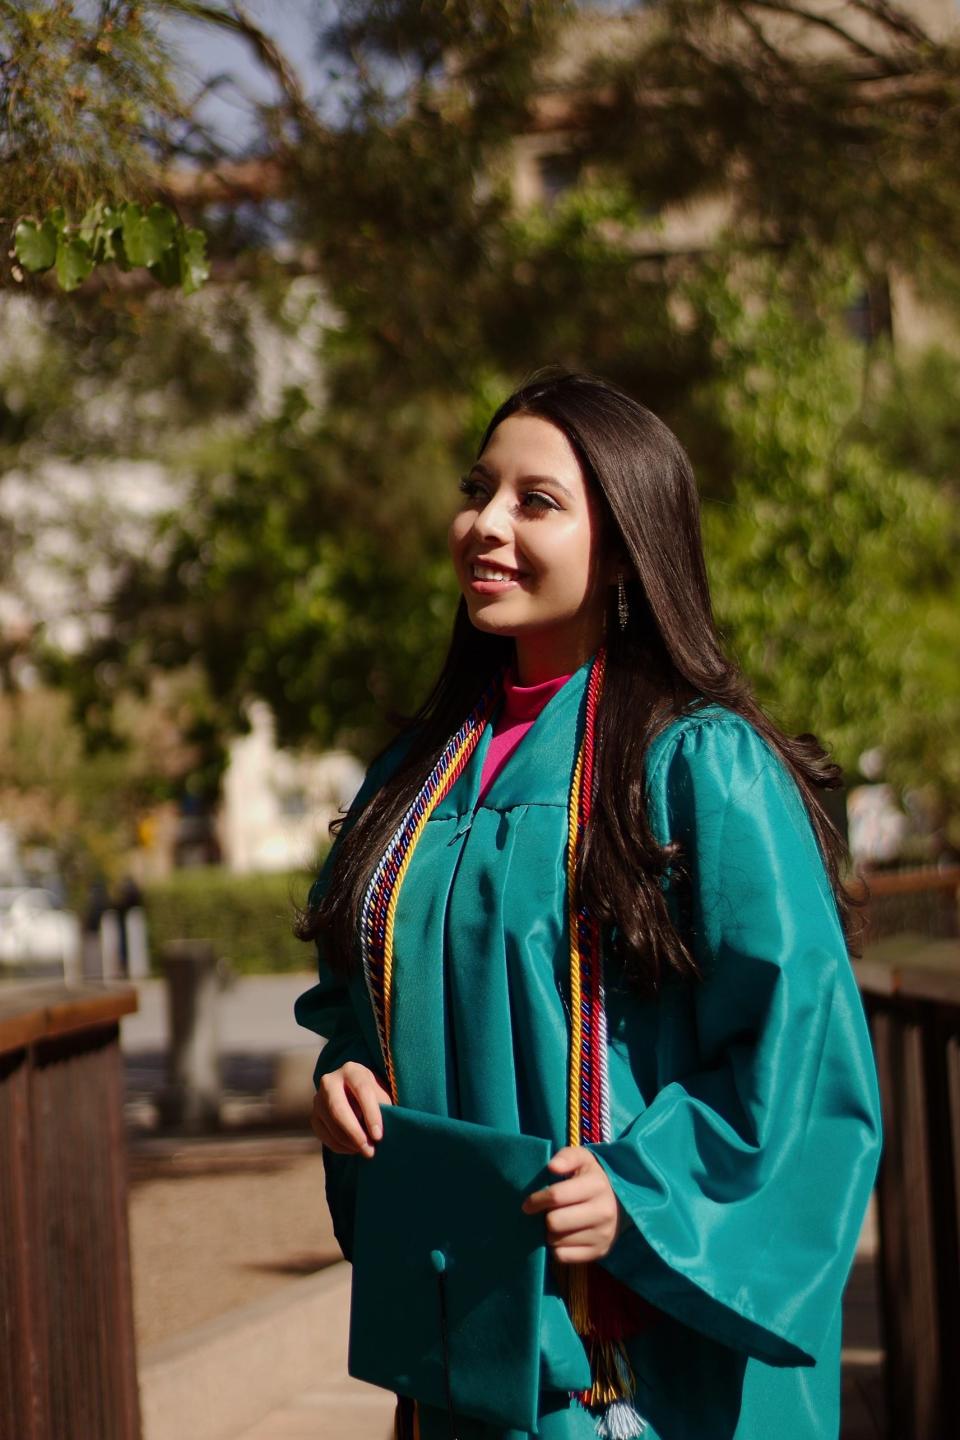 Santa Teresa High School Class of 2022 graduate Paloma Del Valle will be attending Harvard University to study human developmental and regenerative biology with the goal of providing more resources to smaller communities.